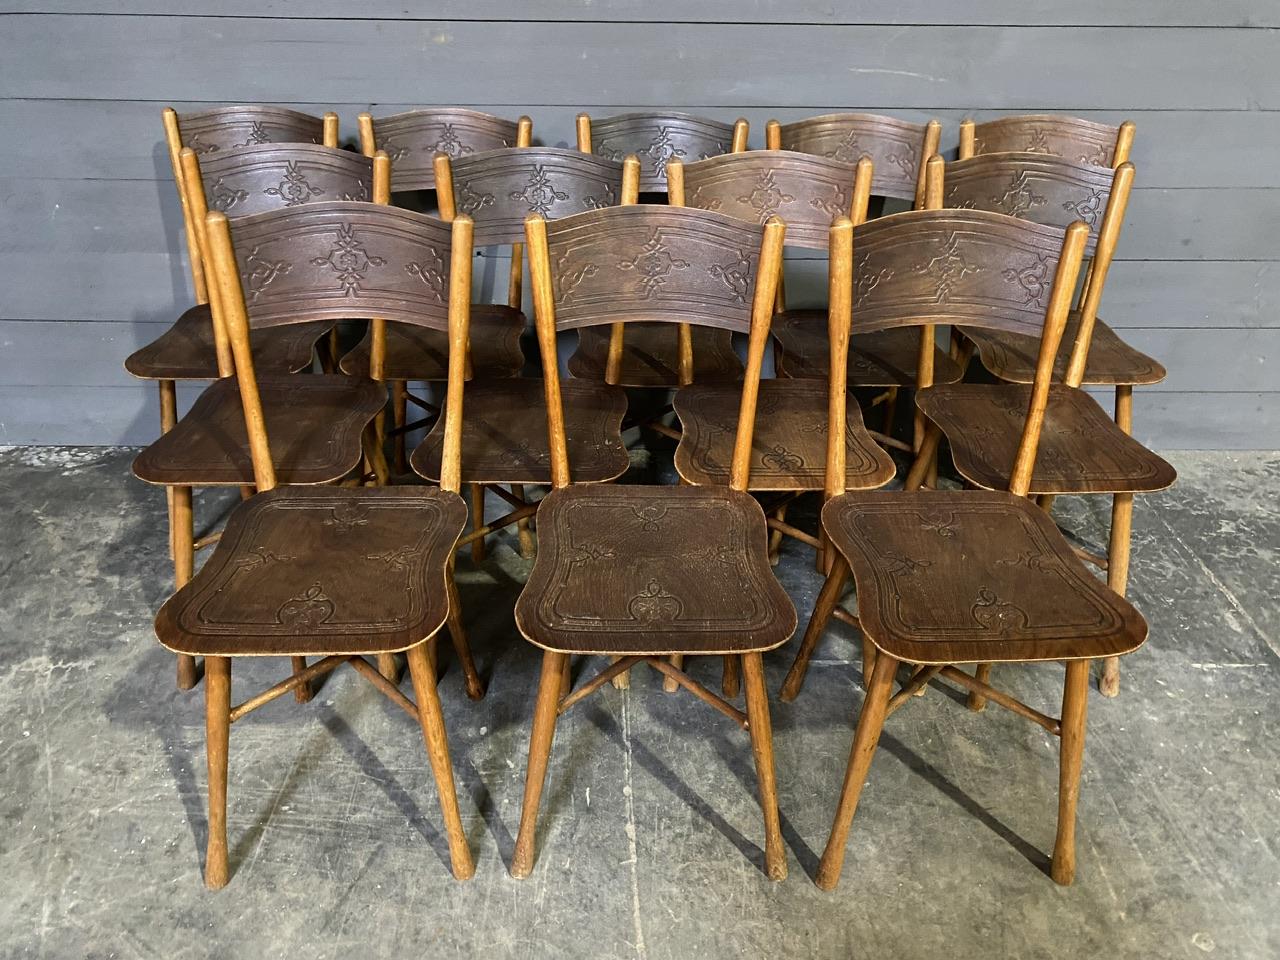 We are very pleased to be able to offer an extremely rare set of 12 Bentwood Bistro Dining Chairs by the renowned manufacturer J & J Kohn of Vienna Austria. 
Not only is a set of 12 impossible to find but also this is an extremely rare model that I